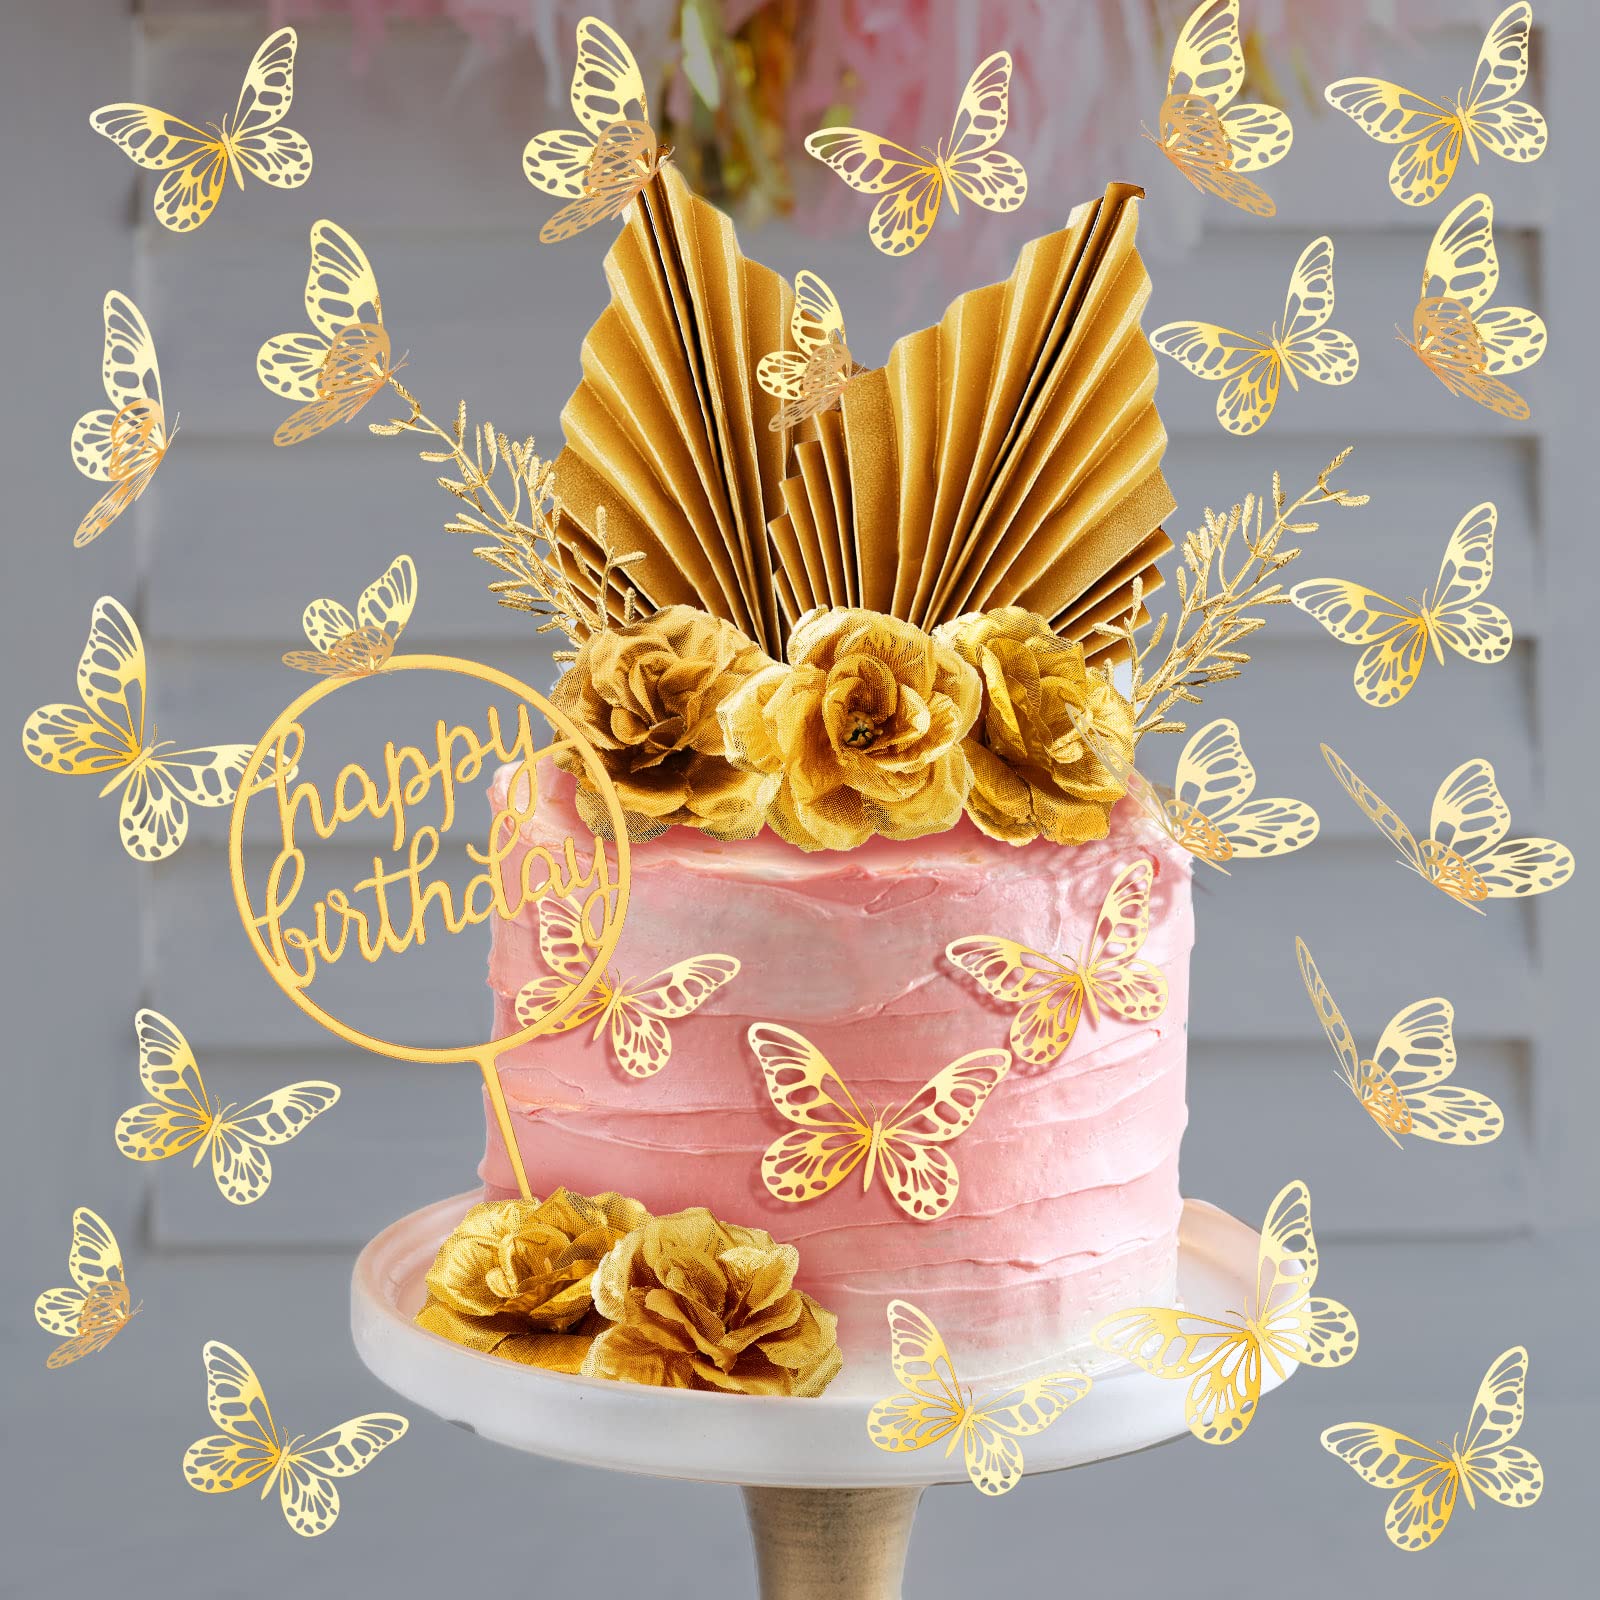 52 Pcs Flower Toppers for Cake Gold Balls Decorations Boho Topper Butterfly Birthday Wedding Baby Shower Party Decoration(Gold)